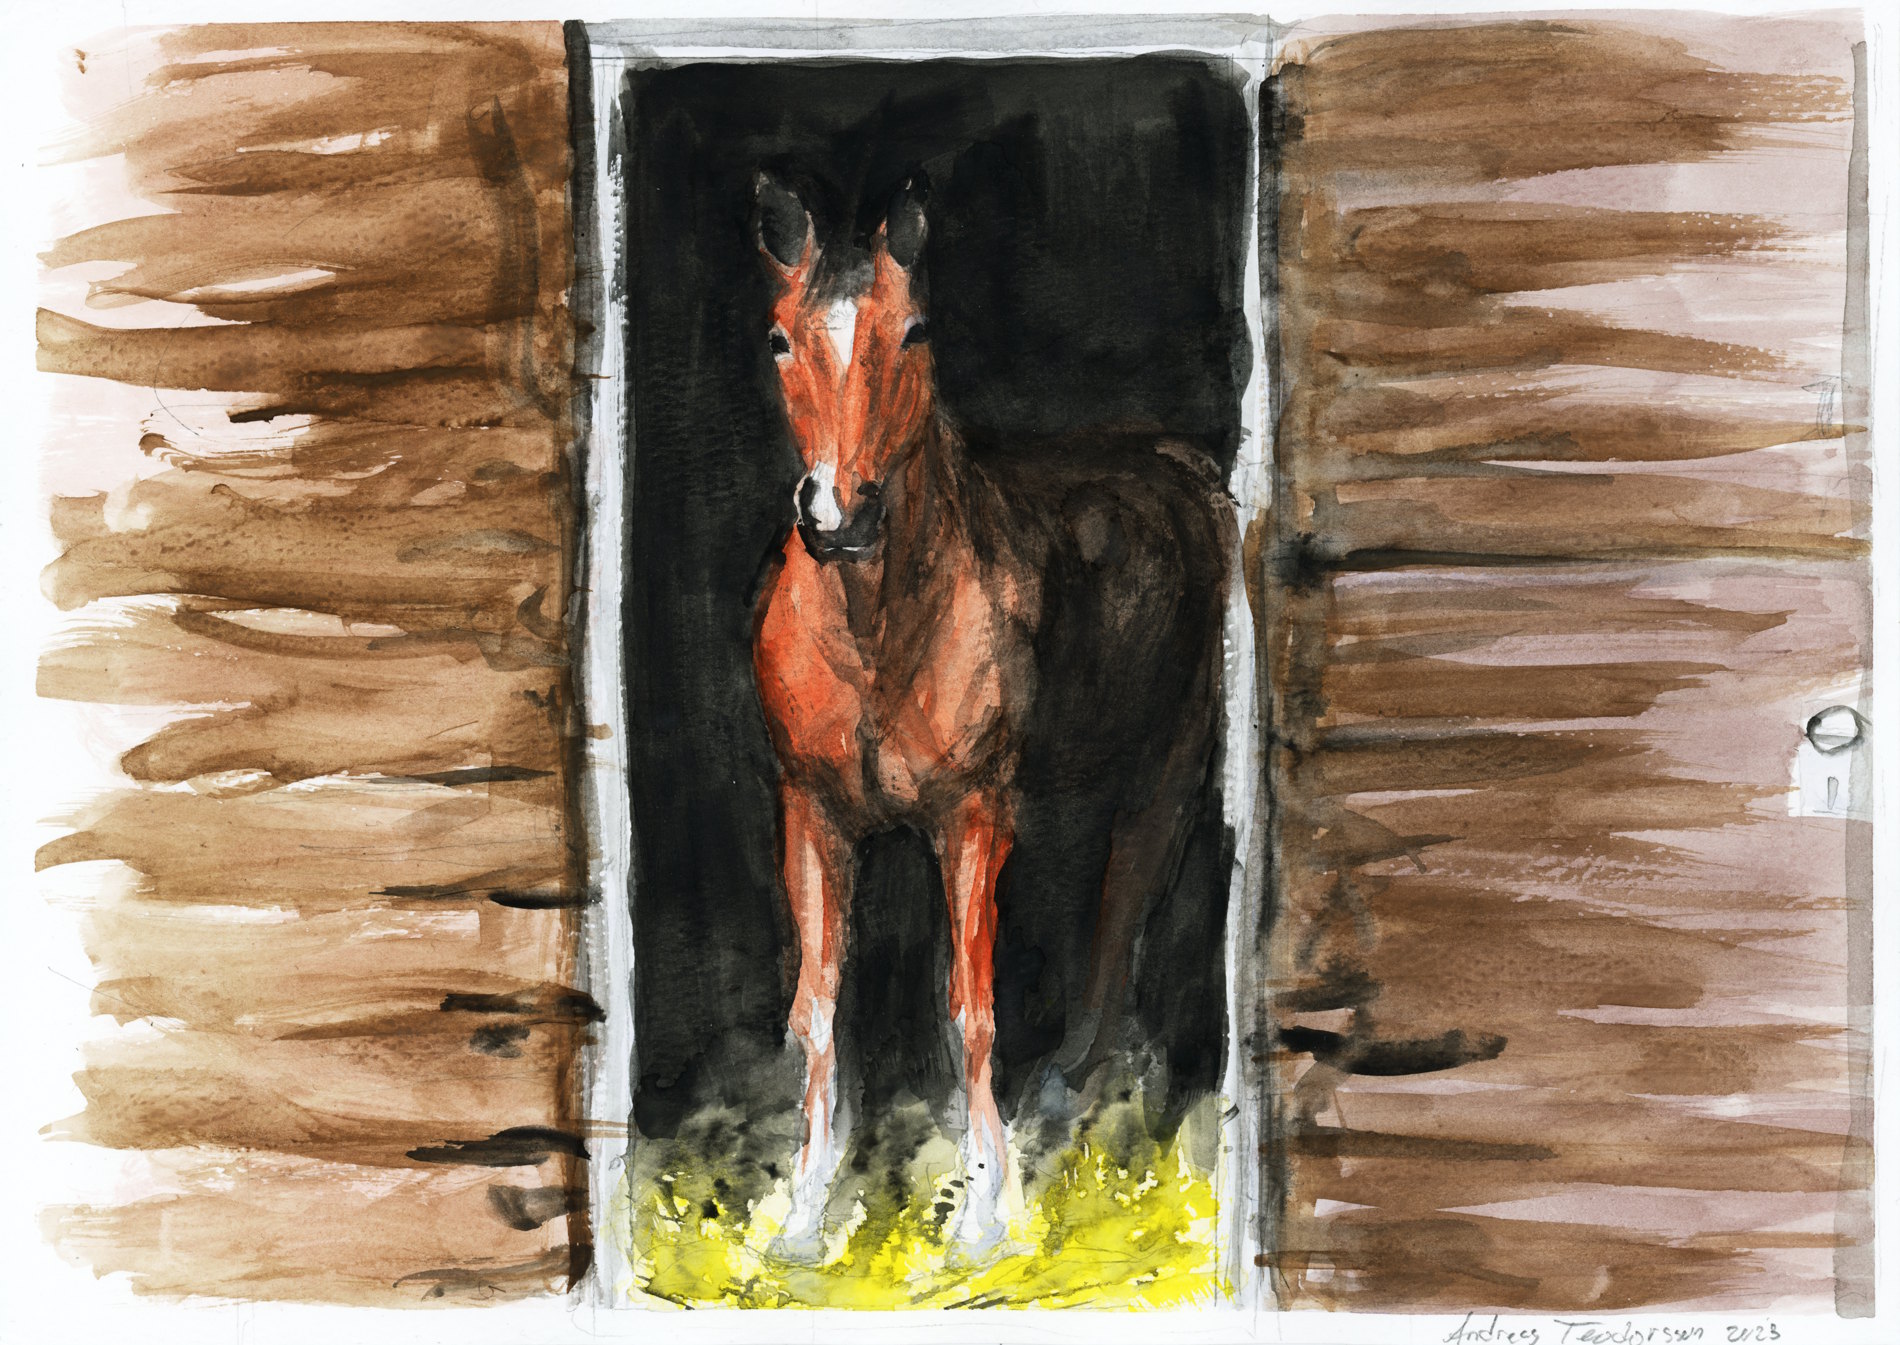 Watercolor drawing of a horse in its box